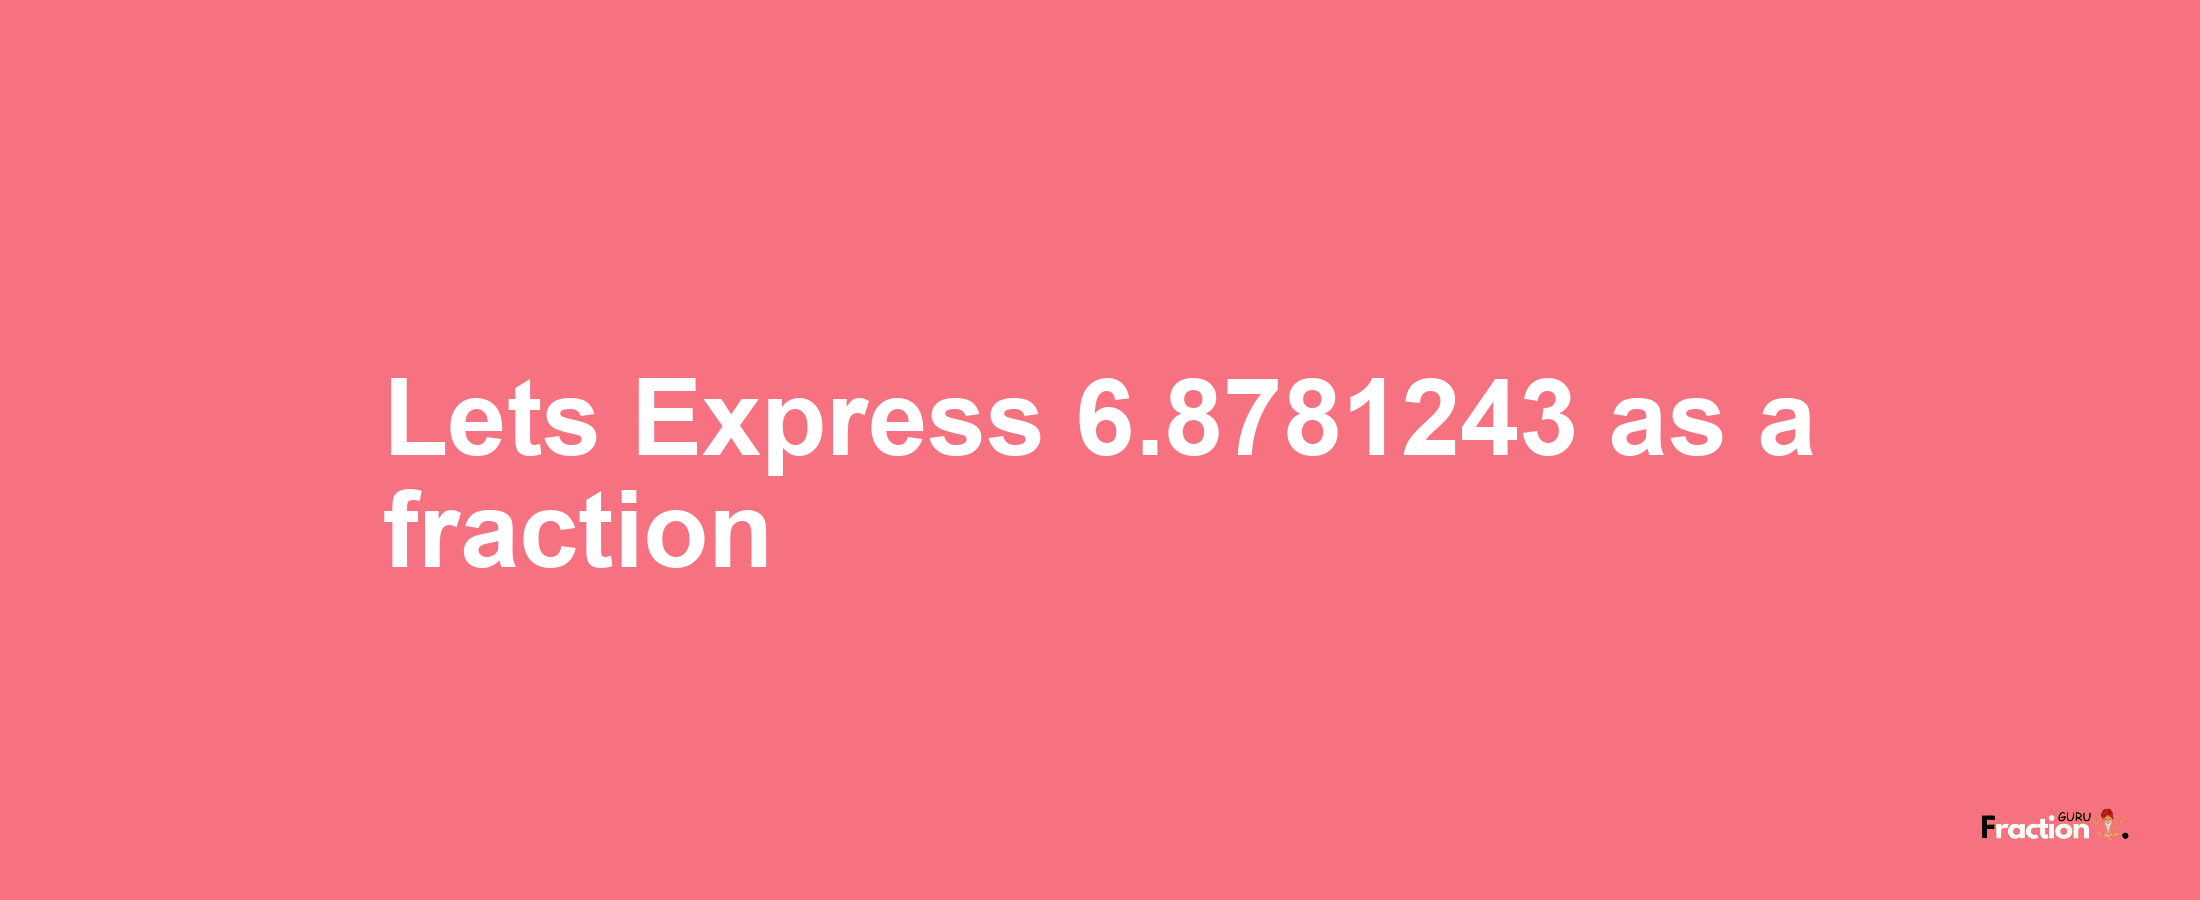 Lets Express 6.8781243 as afraction